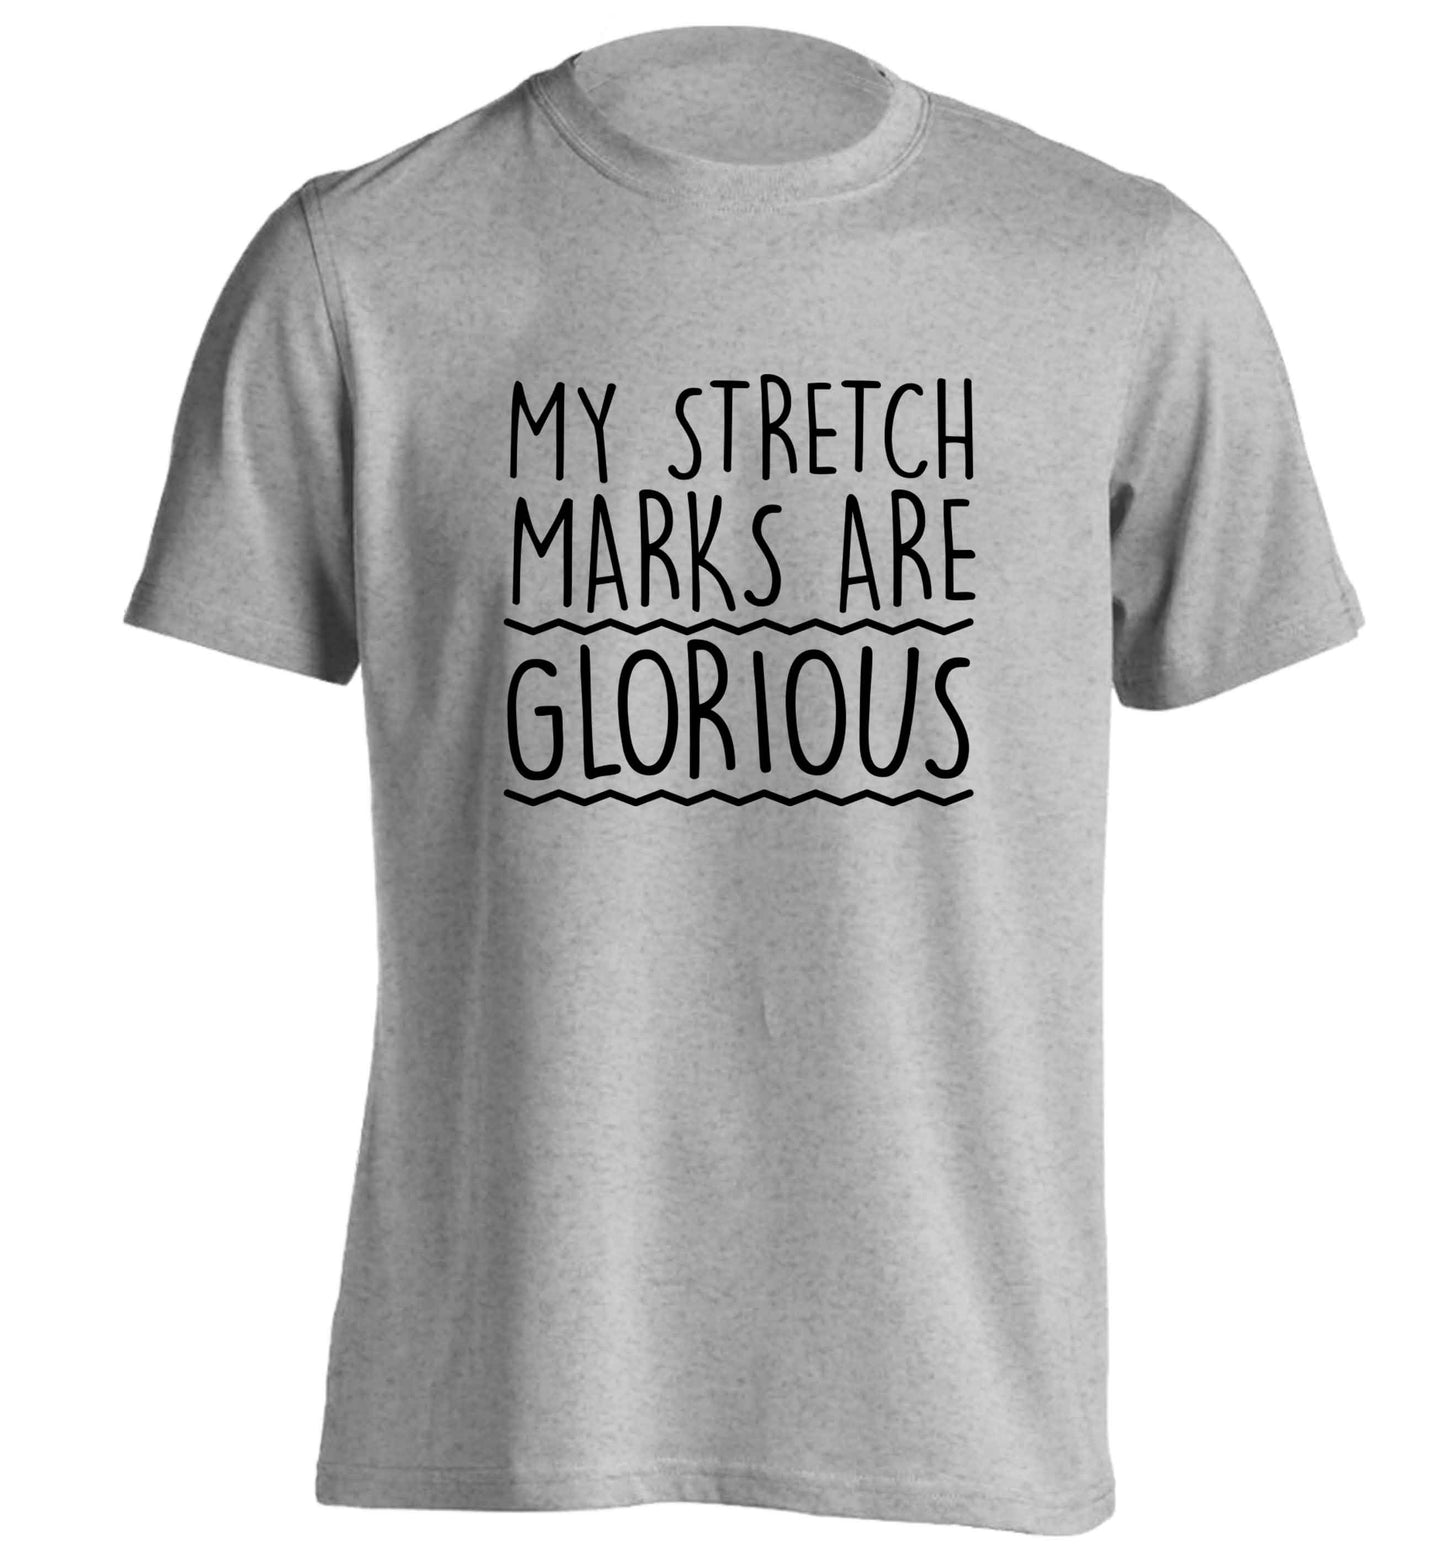 My stretch marks are glorious adults unisex grey Tshirt 2XL